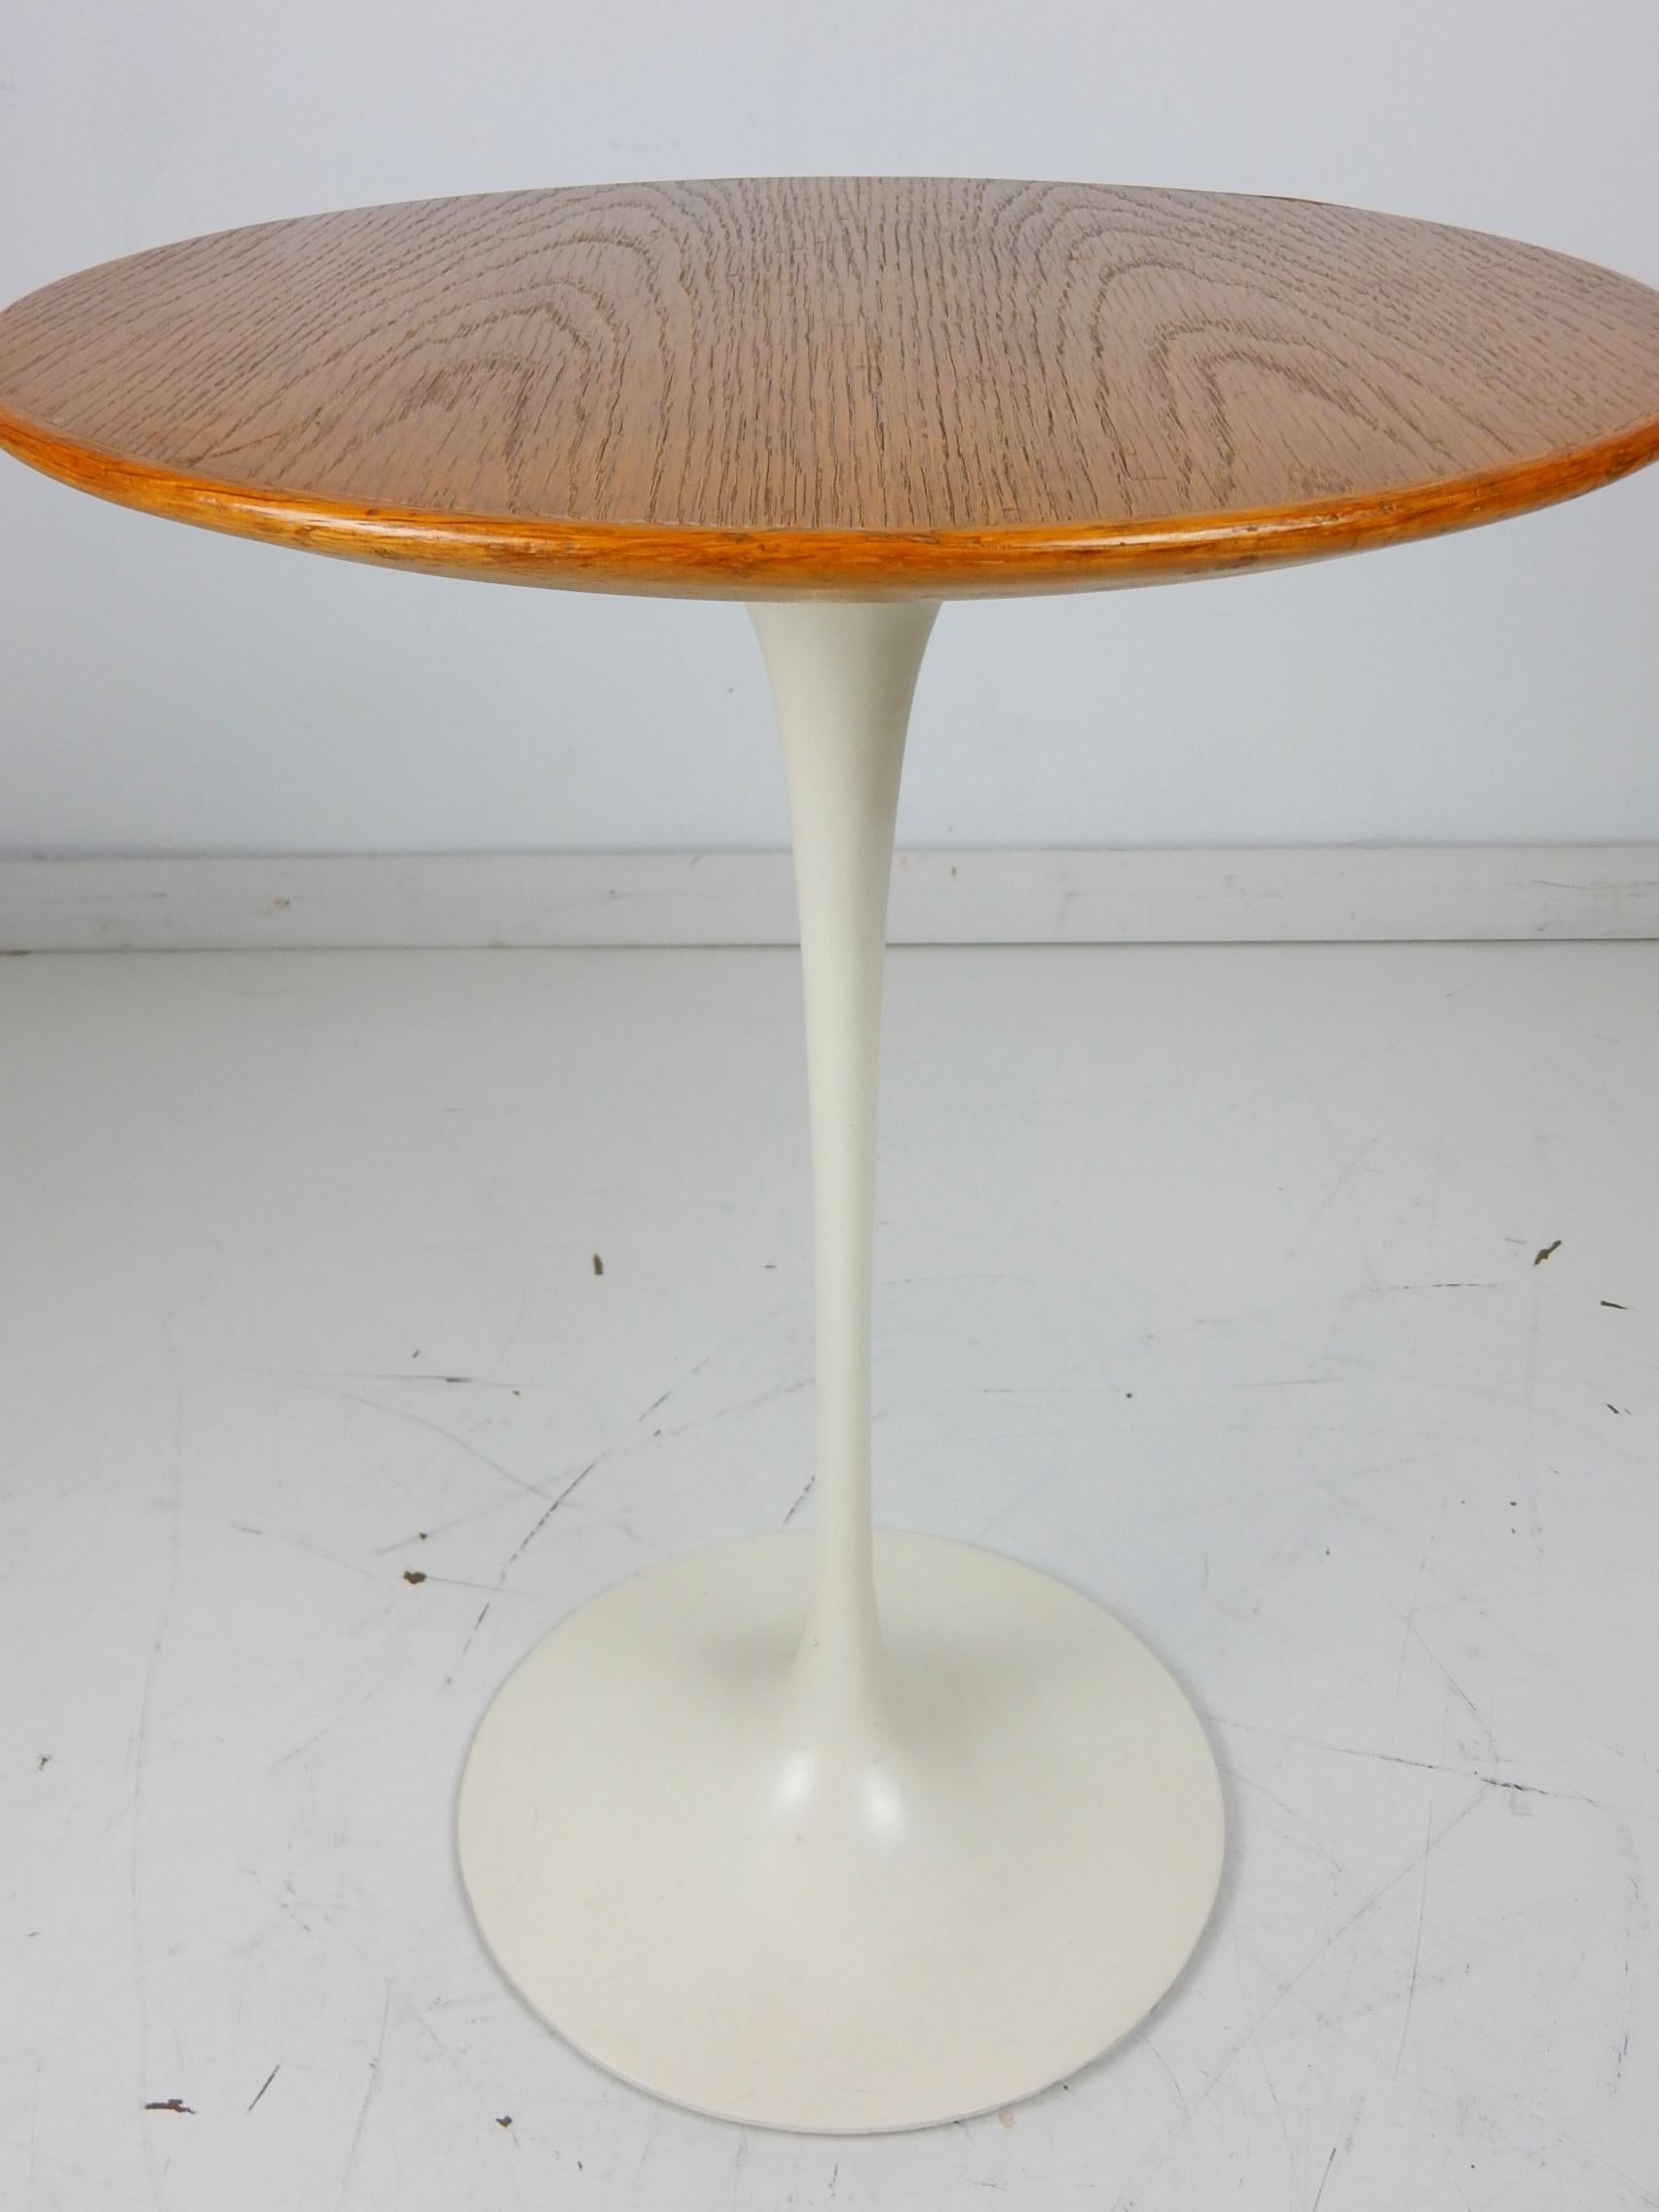 Clean vintage wood top side table by Eero Saarinen for Knoll.
Iconic, simple, Classic.